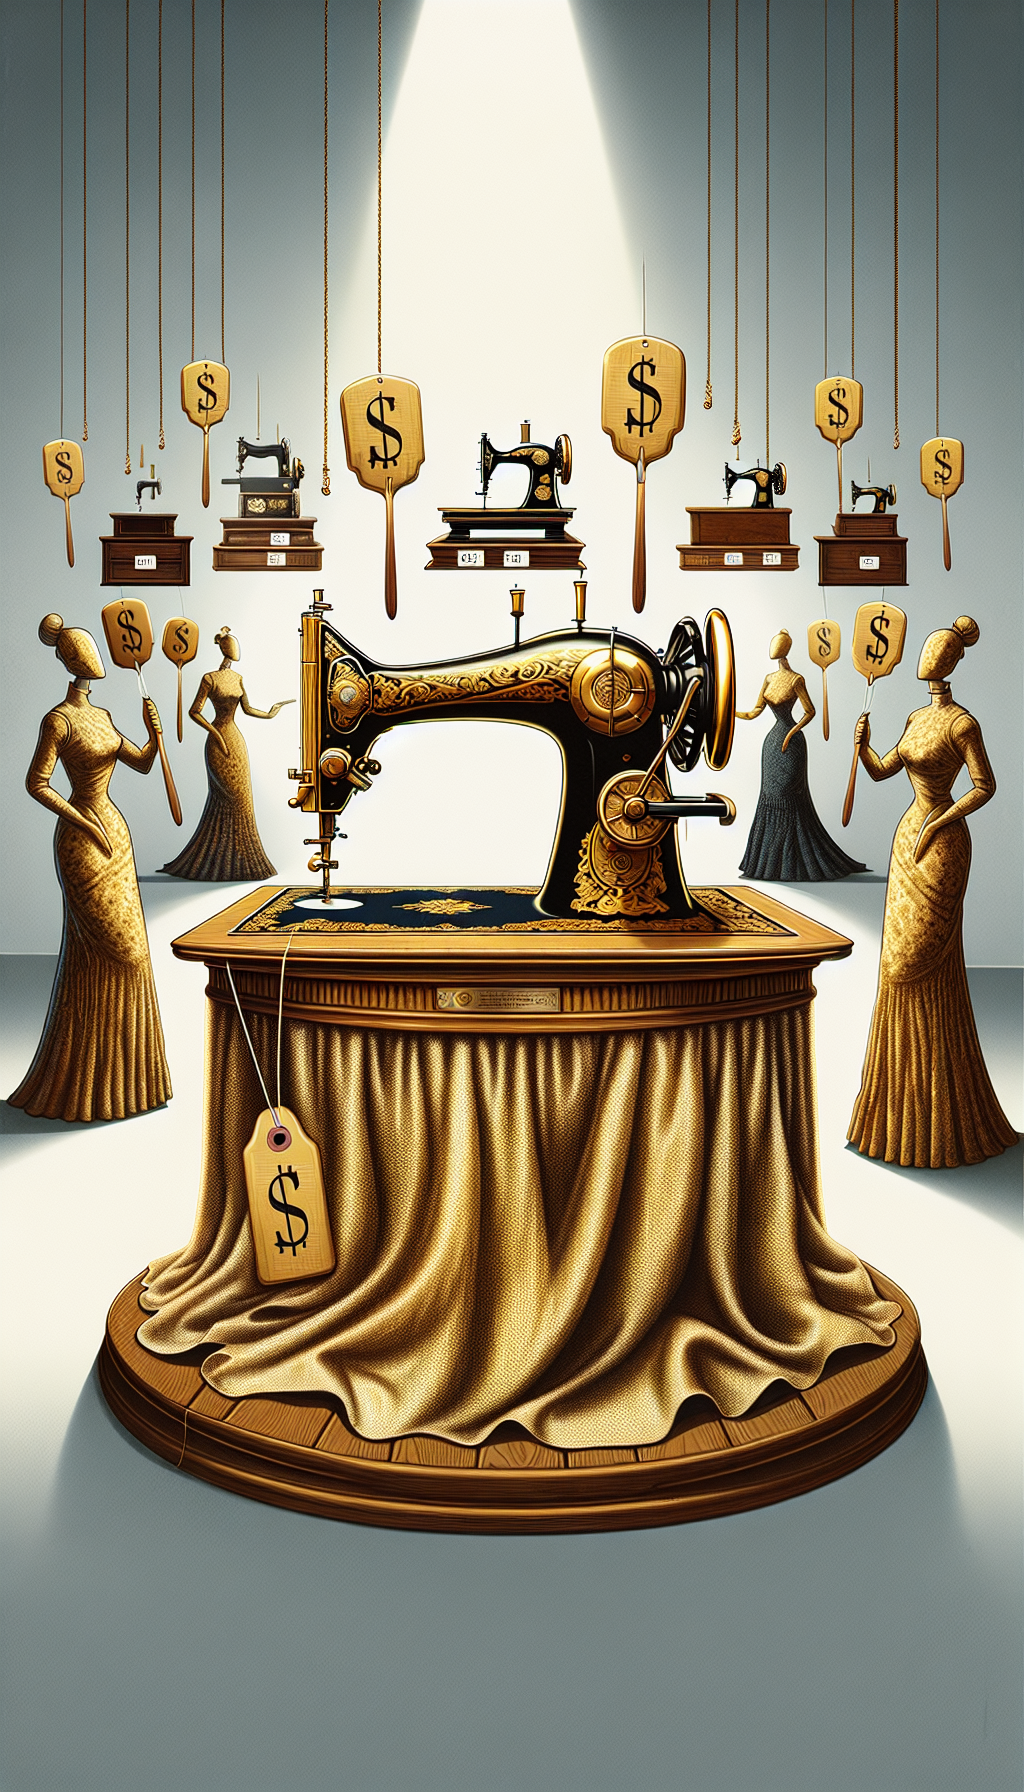 An opulent auction stage featuring a gilded, classic sewing machine centerpiece draped in a shimmering fabric that spells out "Vintage Elegance". Eager, shadowed figures hold paddles with dollar signs, symbolizing avid collectors bidding for treasured brands. Faint price tags dangle from ornate, assorted machines in the background, highlighting their high value, blending styles of elegant realism and whimsical caricature.